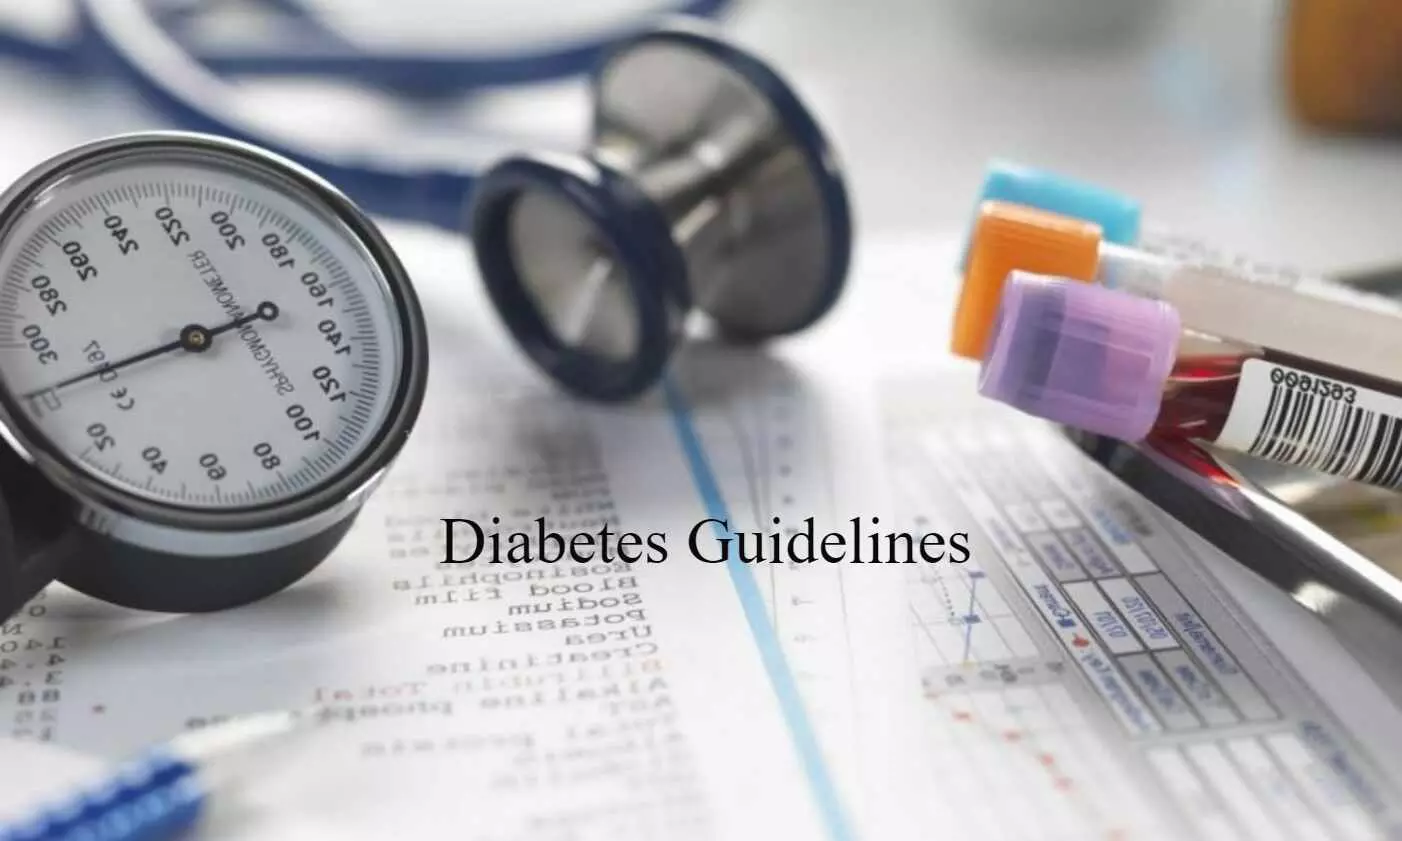 Pharmacological Treatment of Diabetes: ADA 2022 explores beyond metformin as initial therapy